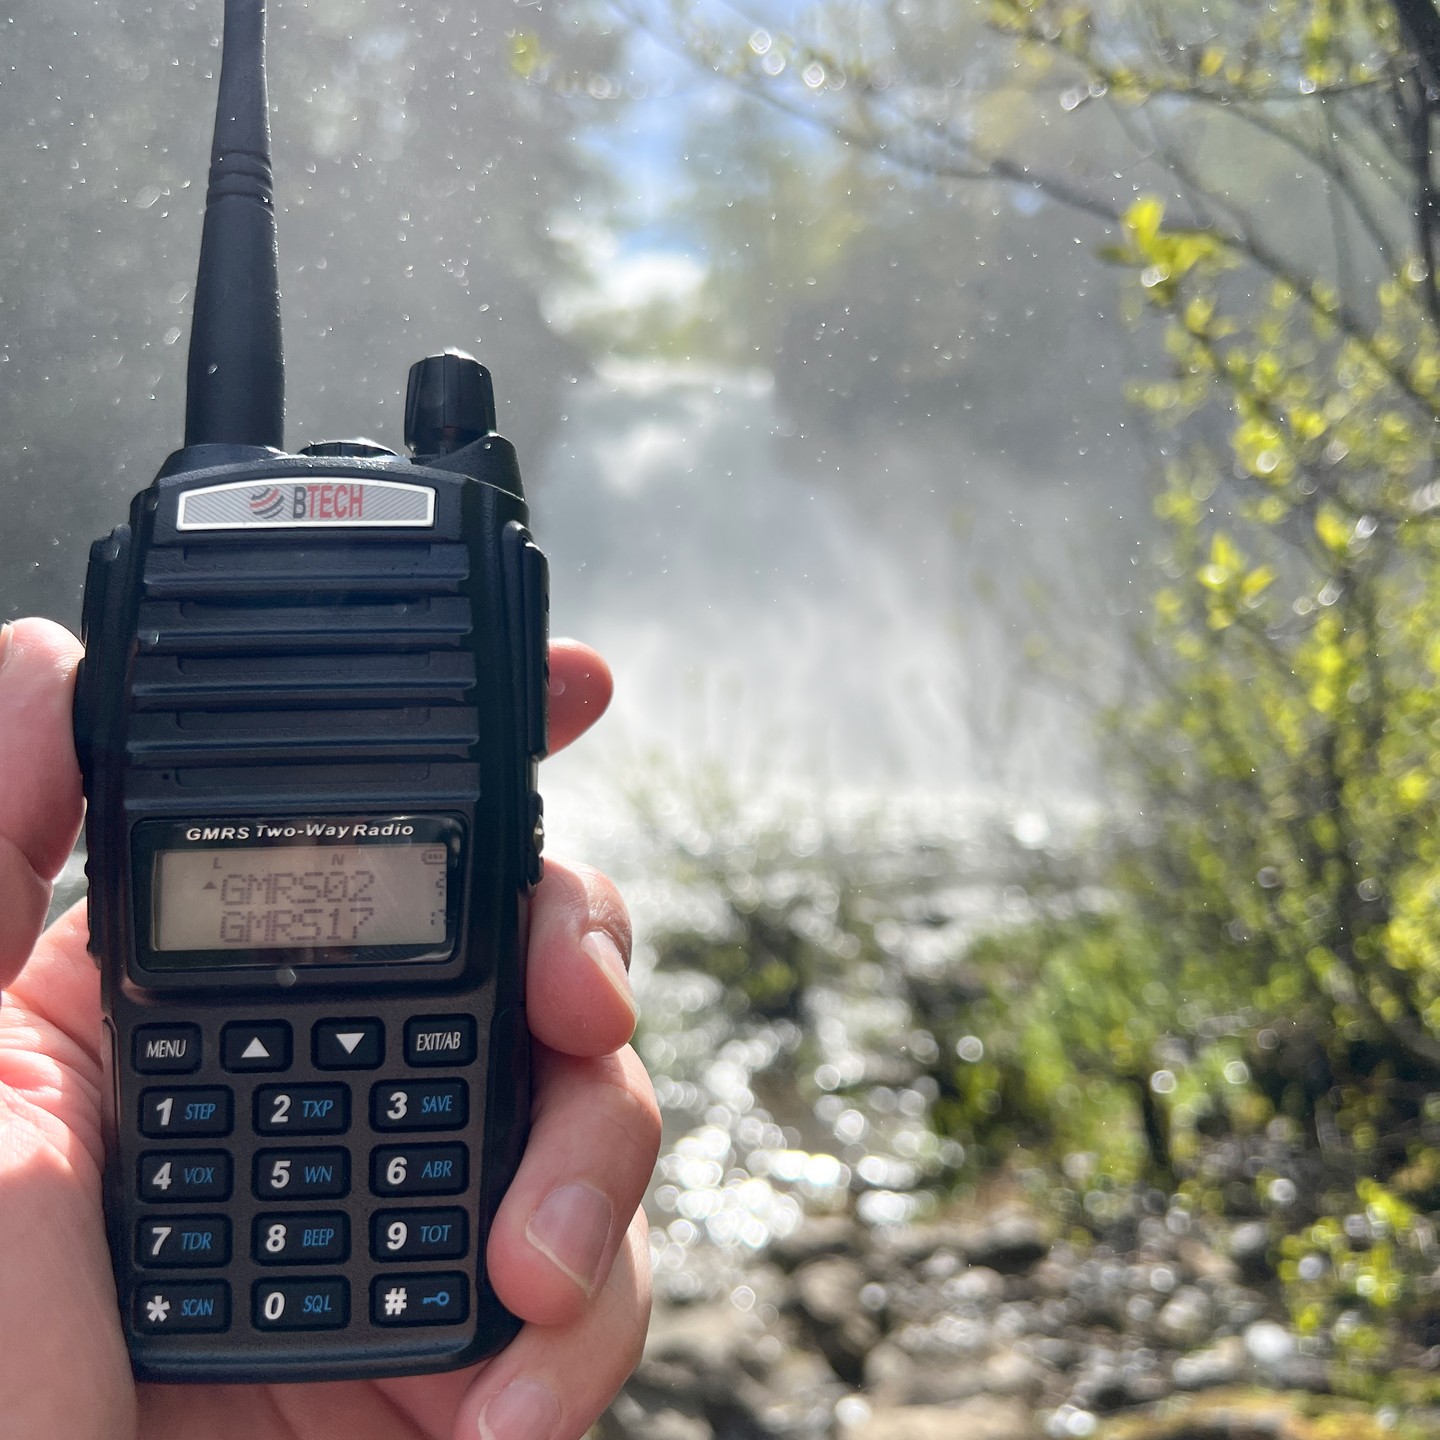 NEW PRODUCT! In 2017 BTECH revolutionized the GMRS world, offering the first advanced programmable GMRS radio…. five years later we have set the bar higher again! Meet the GMRS-V2 *** Check the Link in Bio *** #GMRS #newrelease #productrelease #new #hiking #adventure #travel #safety #outdoors #btech #radio #survival #baofeng #fenggang #amateurradio #communications